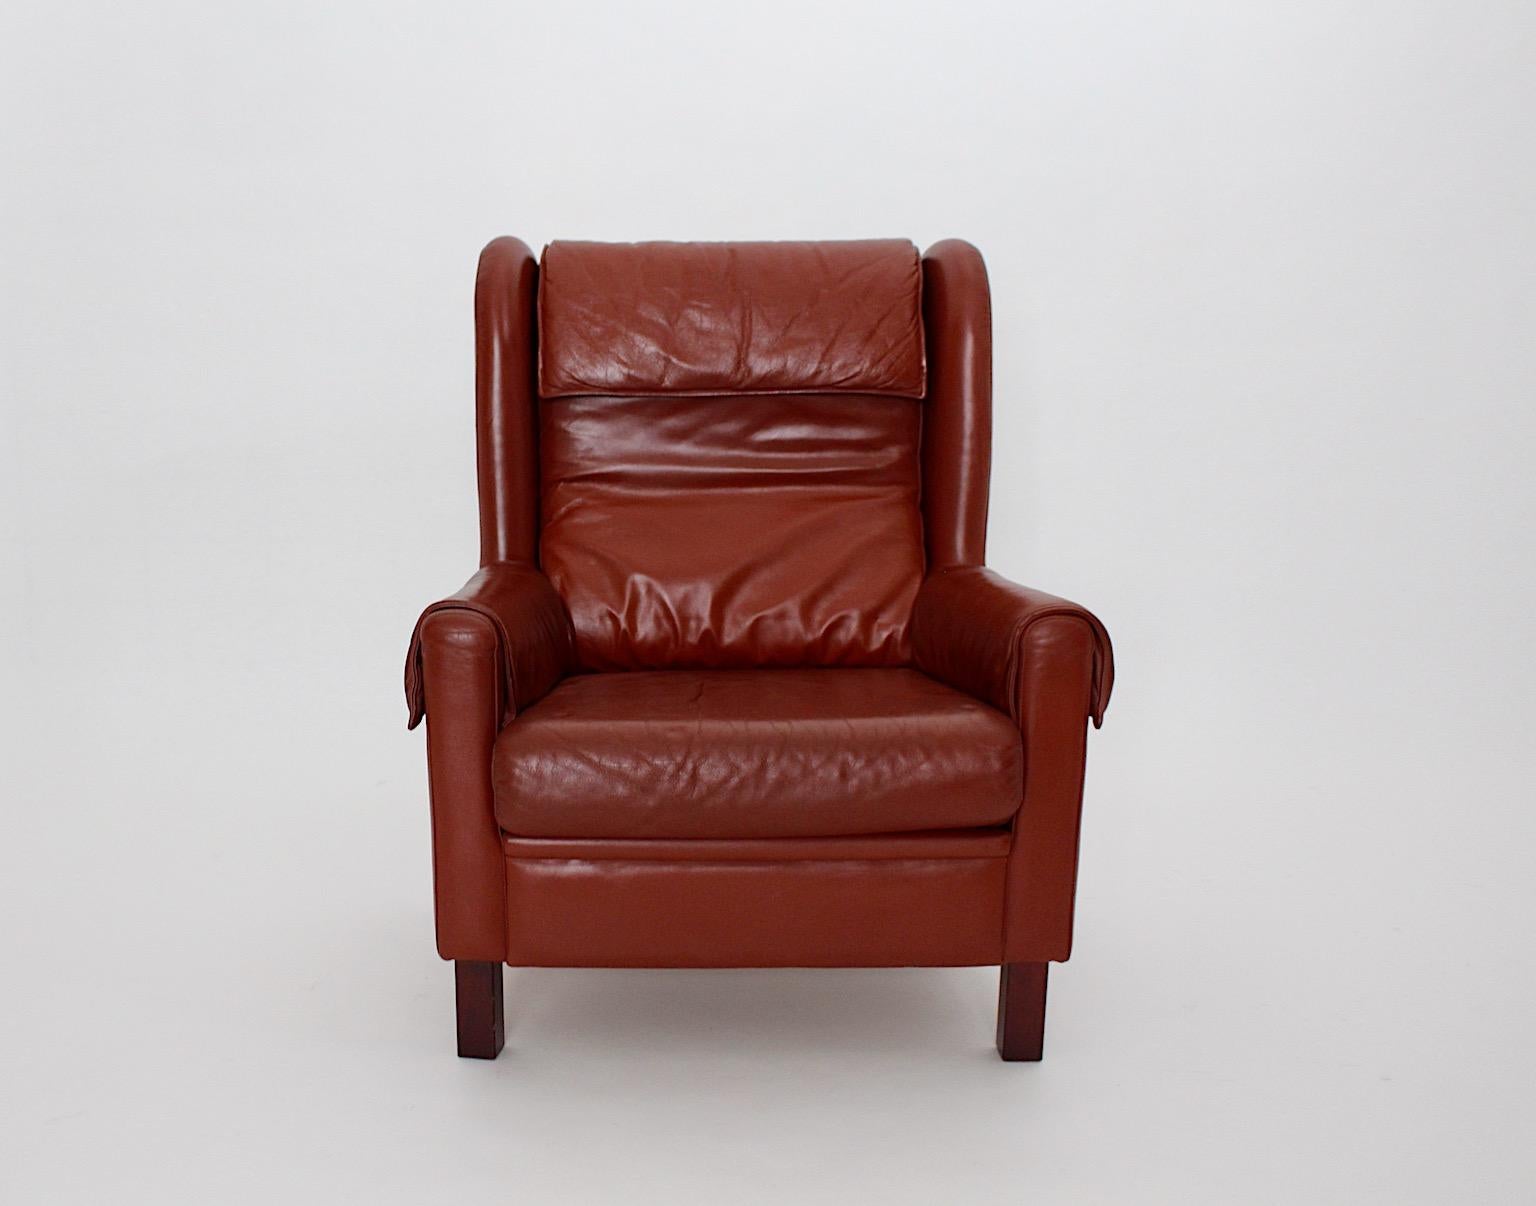 Leather Reddish Brown Vintage Wingback Chair Lounge Chair 1970s Austria For Sale 5